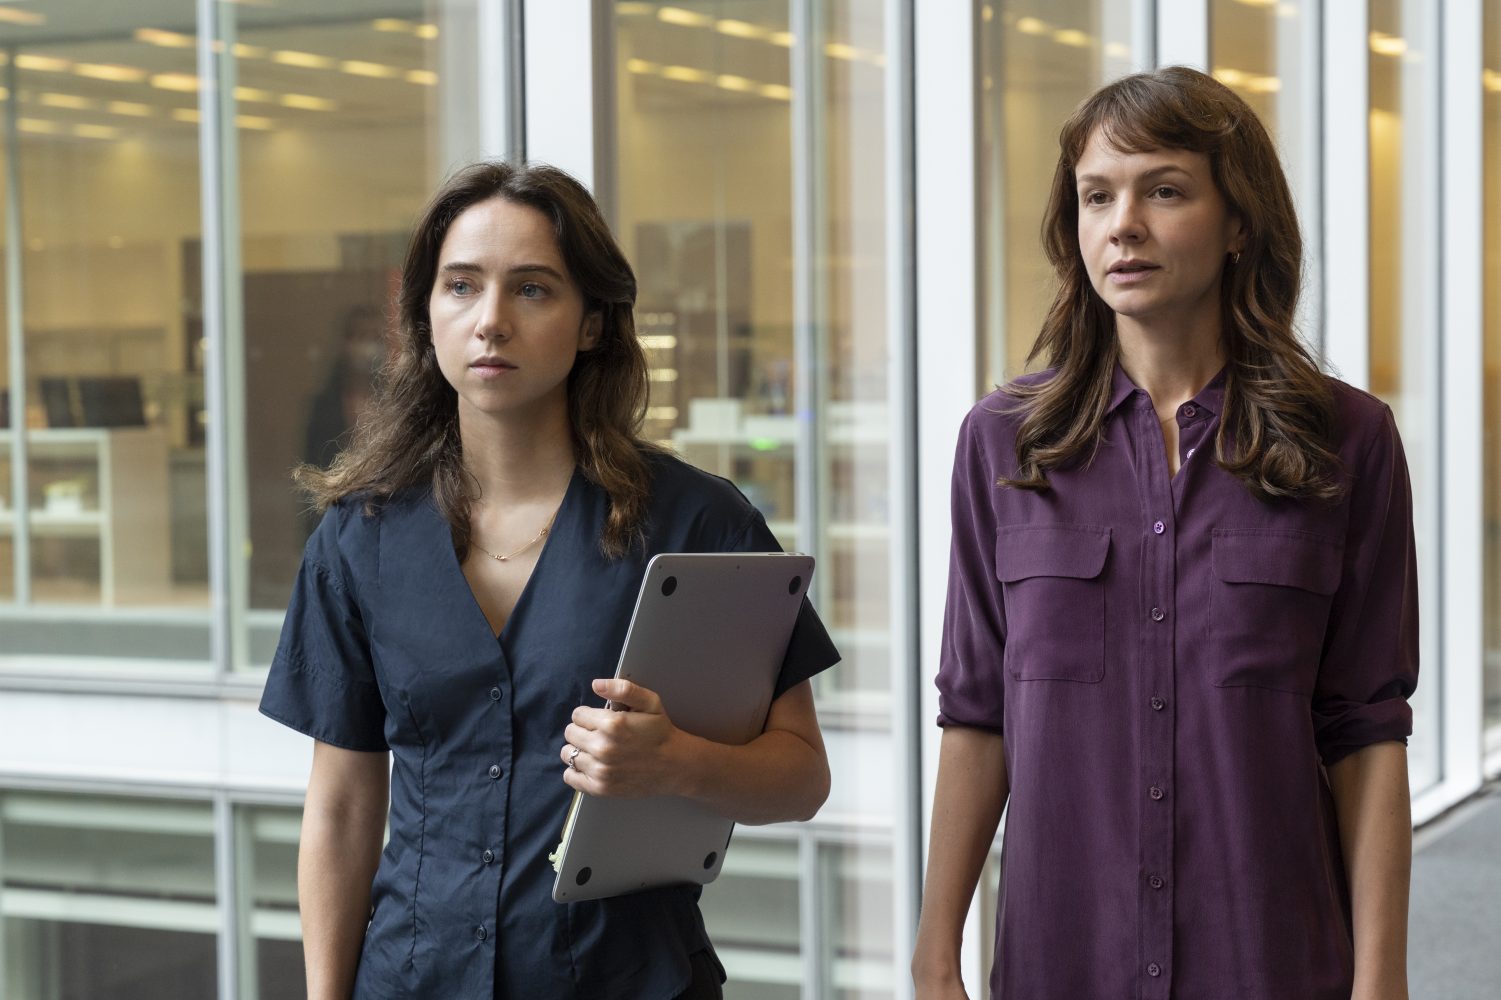 (from left) Jodi Kantor (Zoe Kazan) and Megan Twohey (Carey Mulligan) in She Said, directed by Maria Schrader.